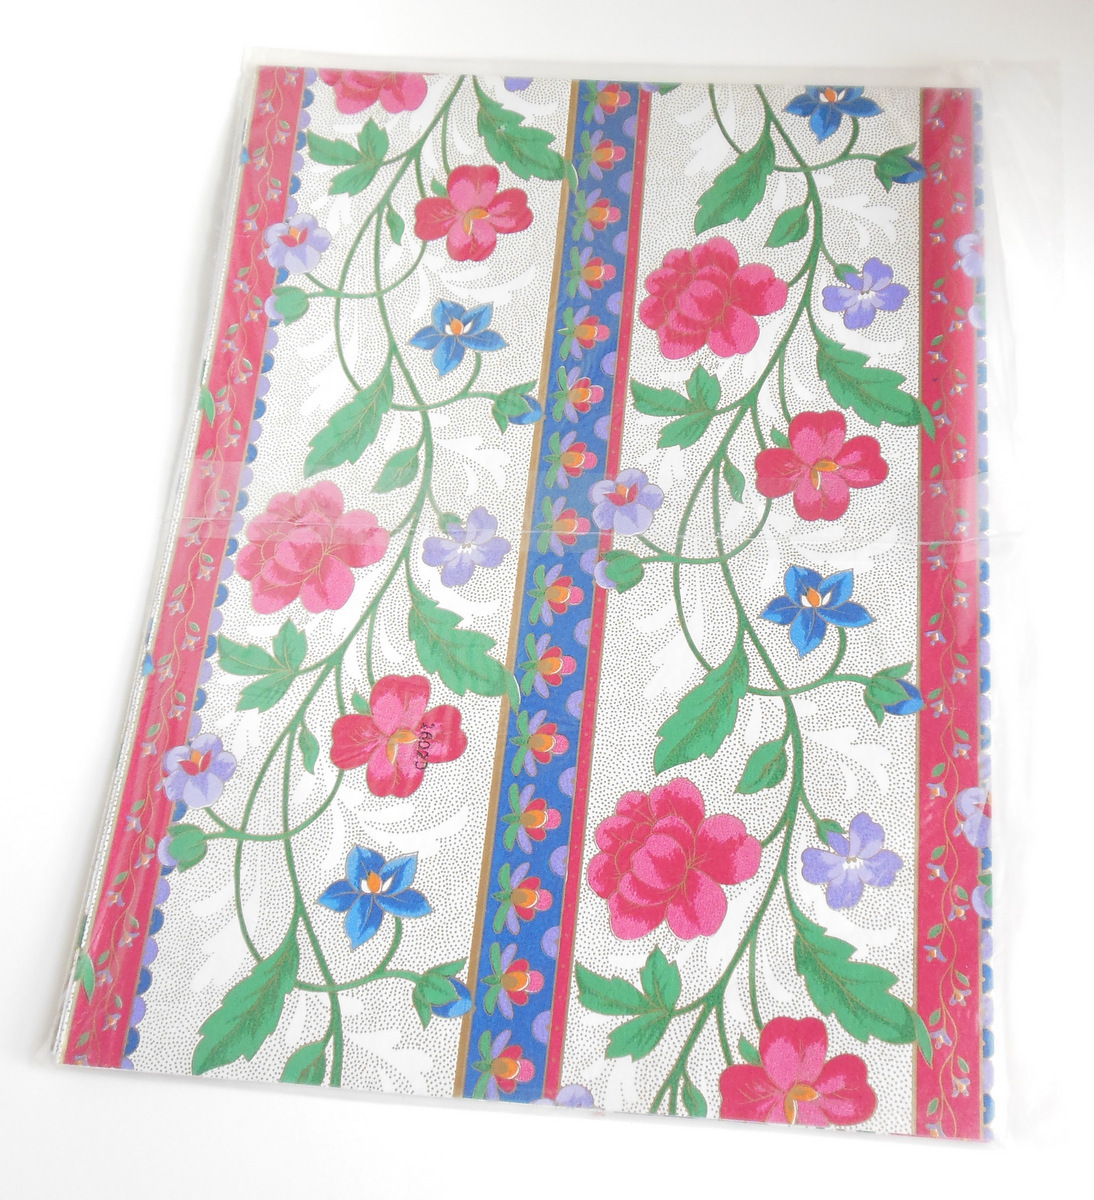 Vintage Forget Me Not American Greetings Sheet Gift Wrapping Paper Floral Pink - $12.95